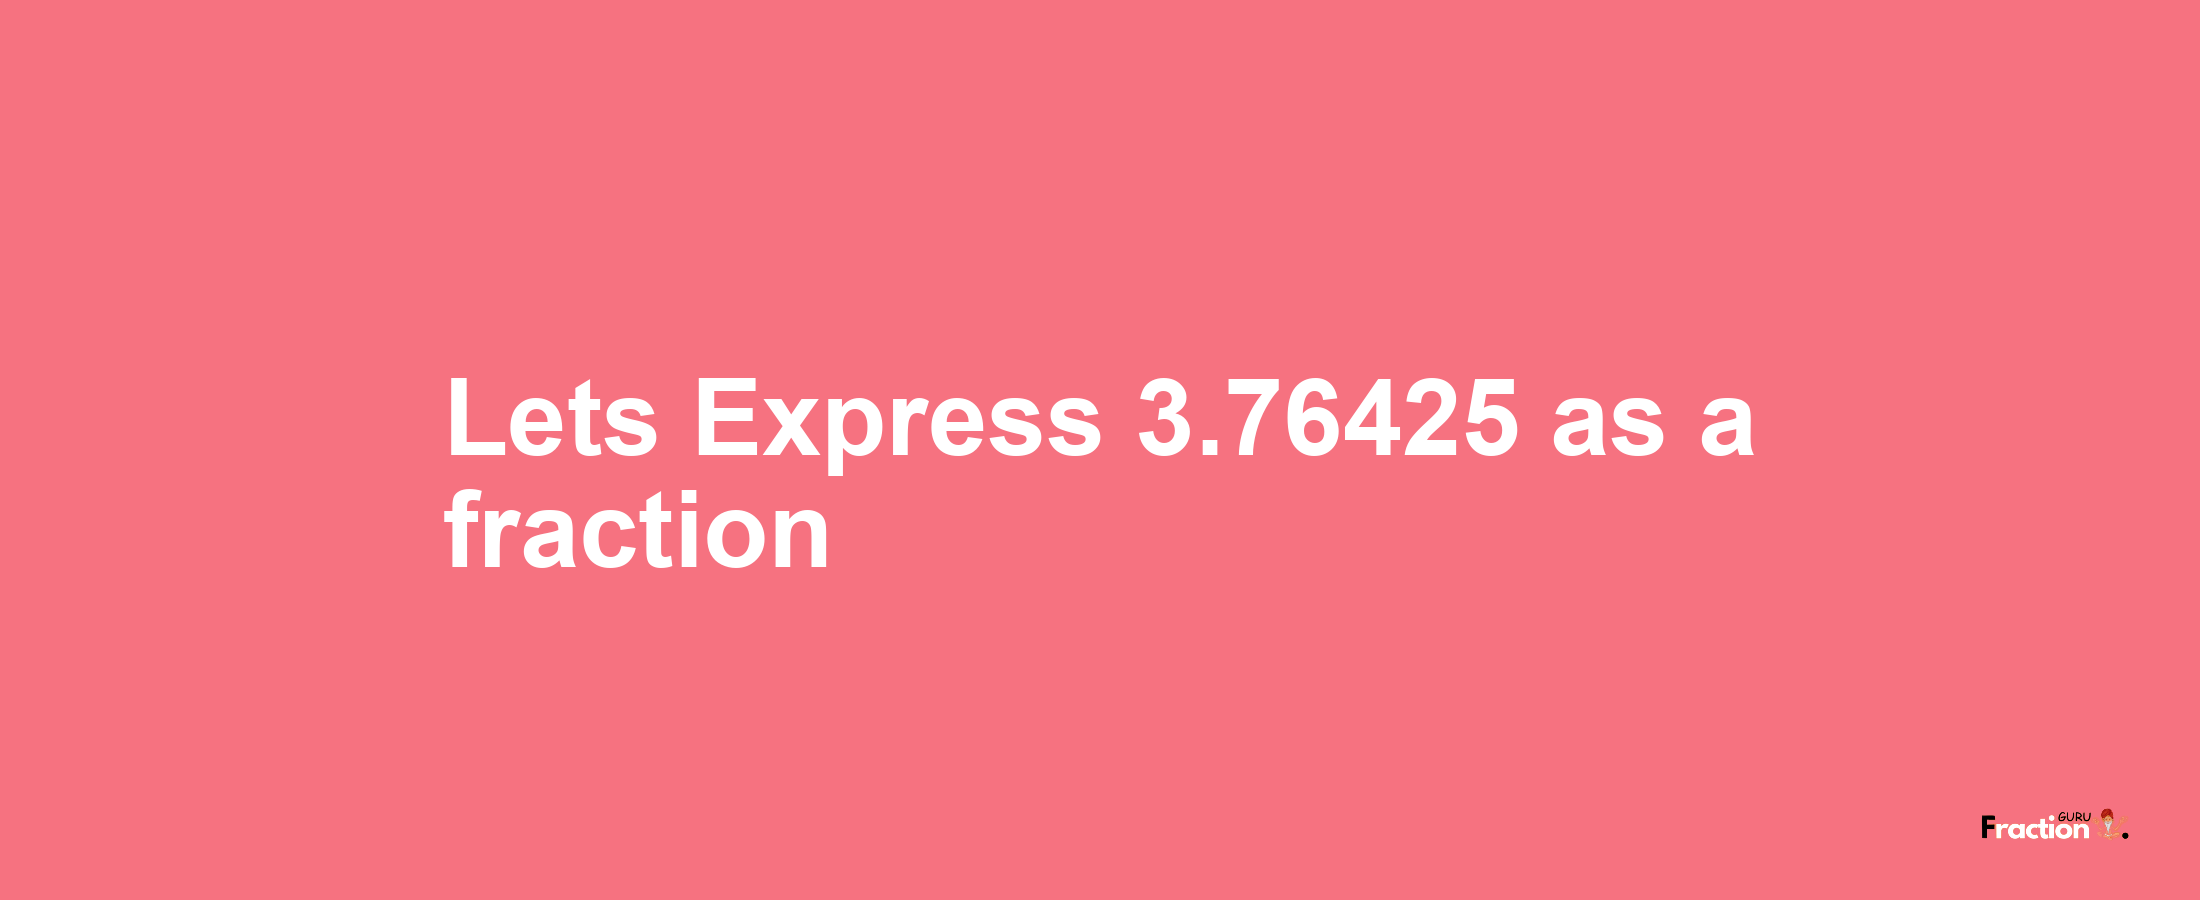 Lets Express 3.76425 as afraction